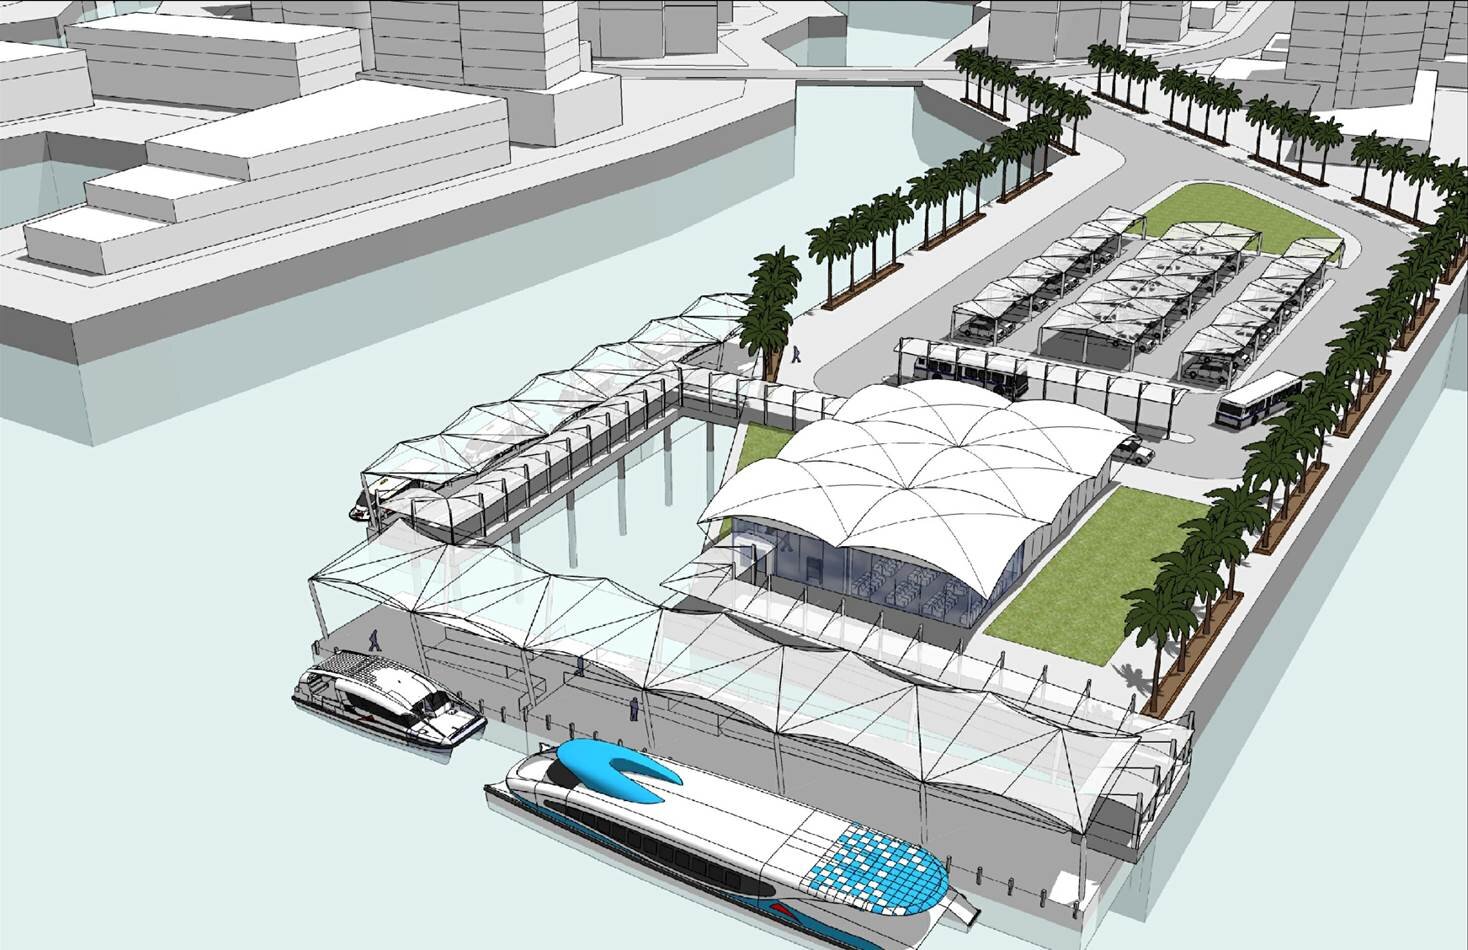 View of the 3D model of a proposed water transport station